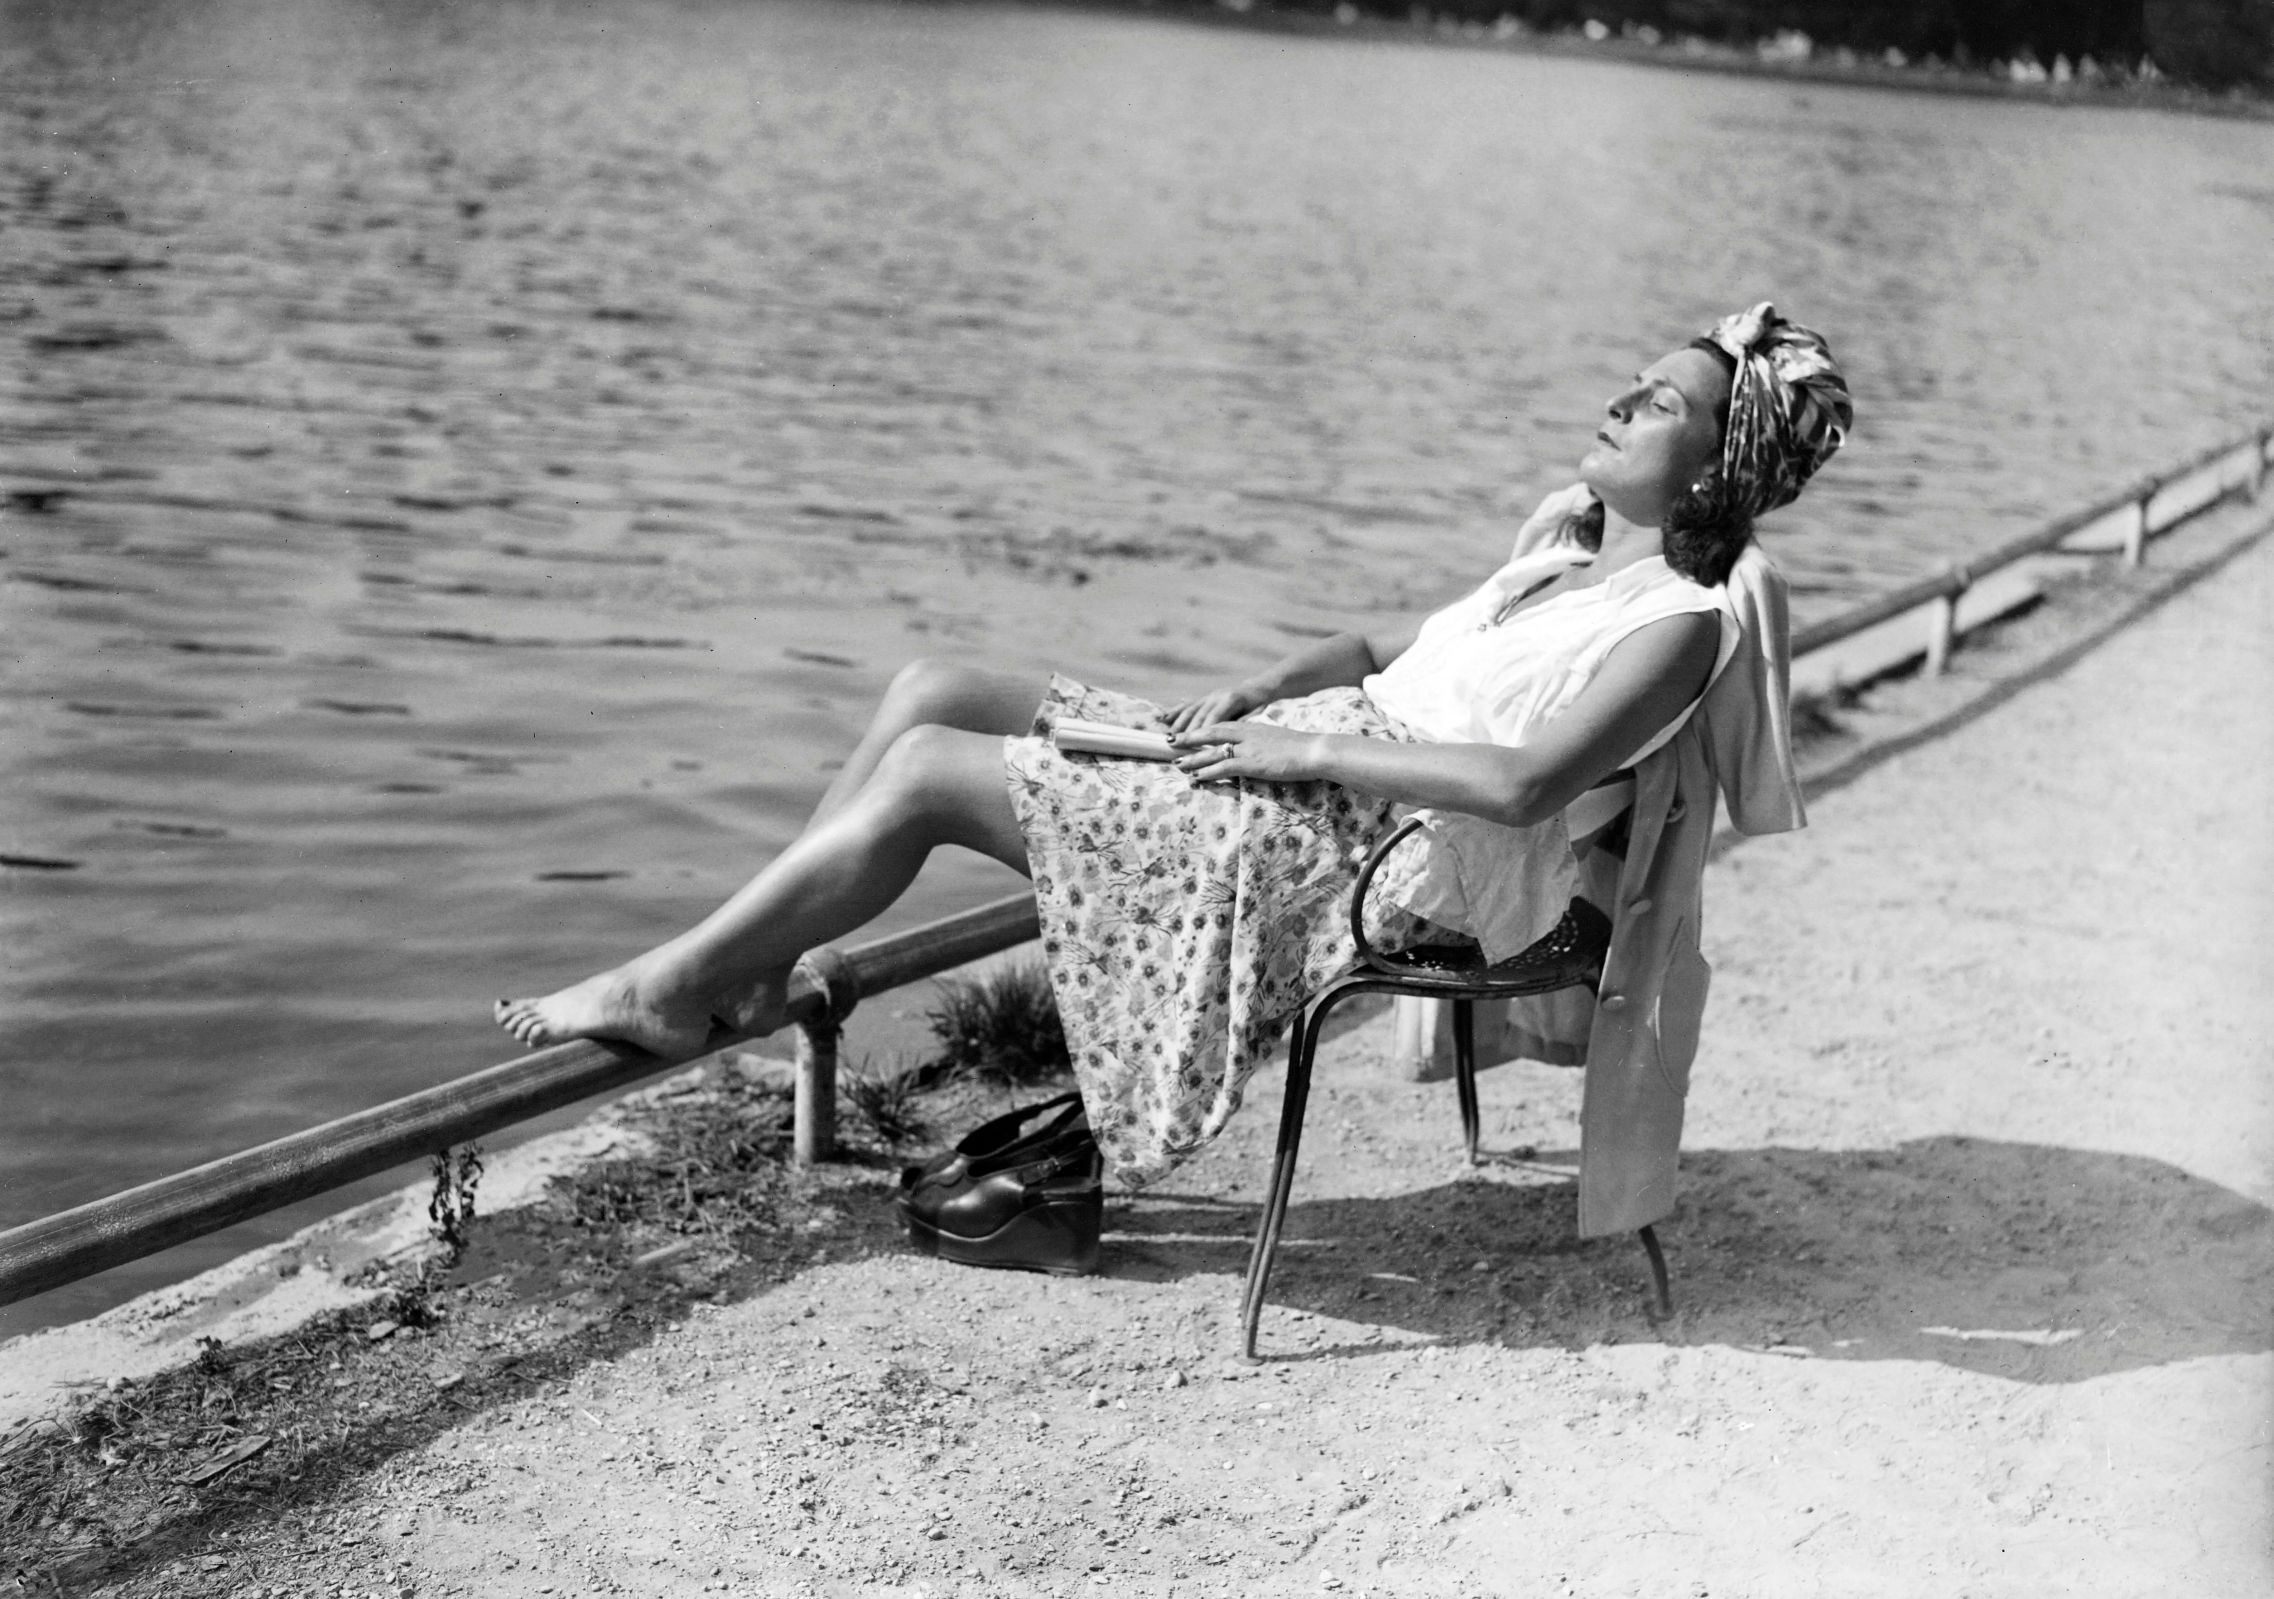 A woman rests and tans near a lake in the Bois de Boulogne near Paris, in June 1946, during a heat wave at the beginning of the 1946 summer.